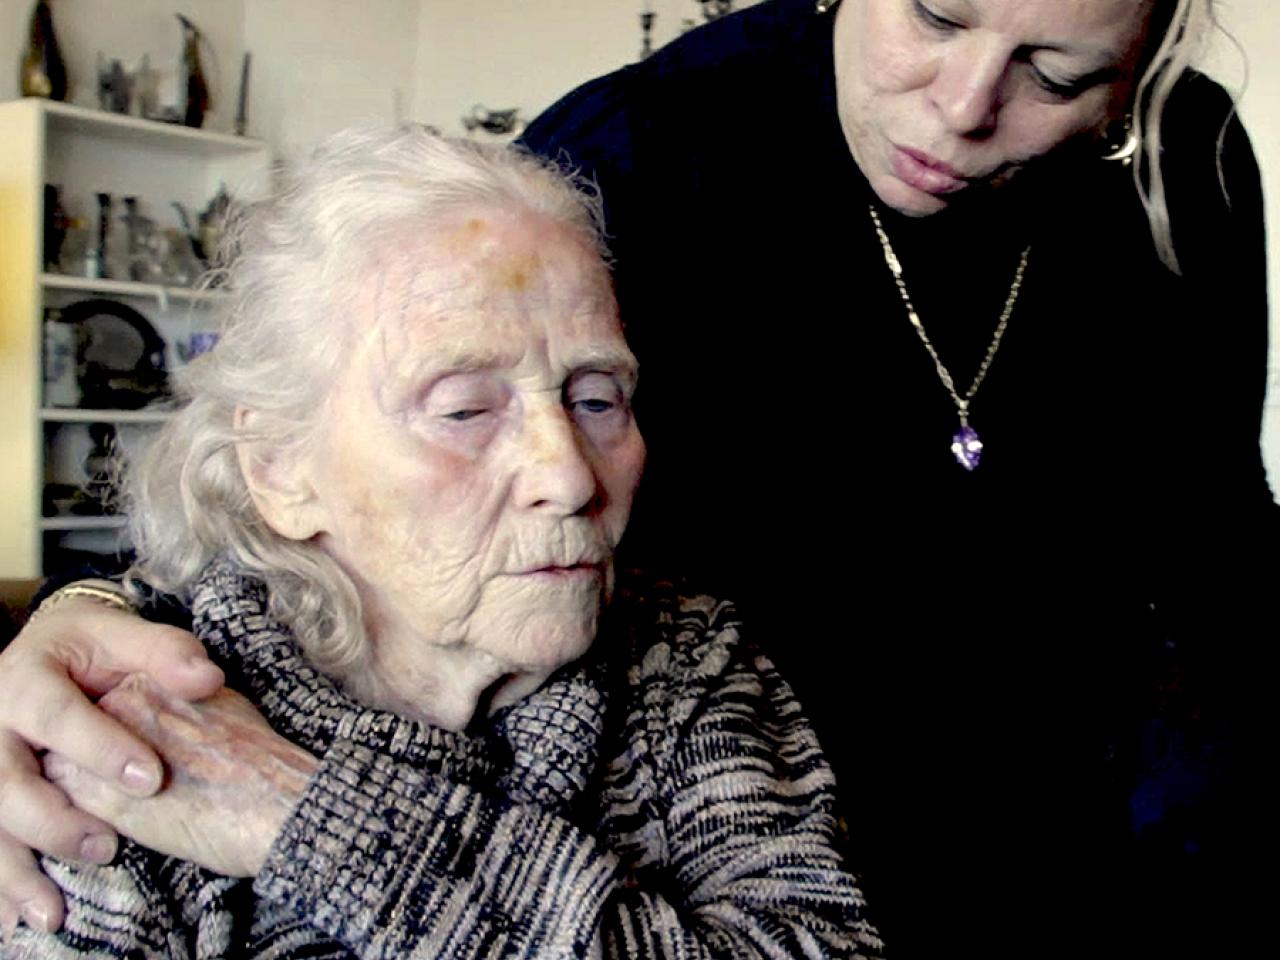 A care worker looks down at an elder woman. They hold hands, and the elder woman's eyes are downcast.